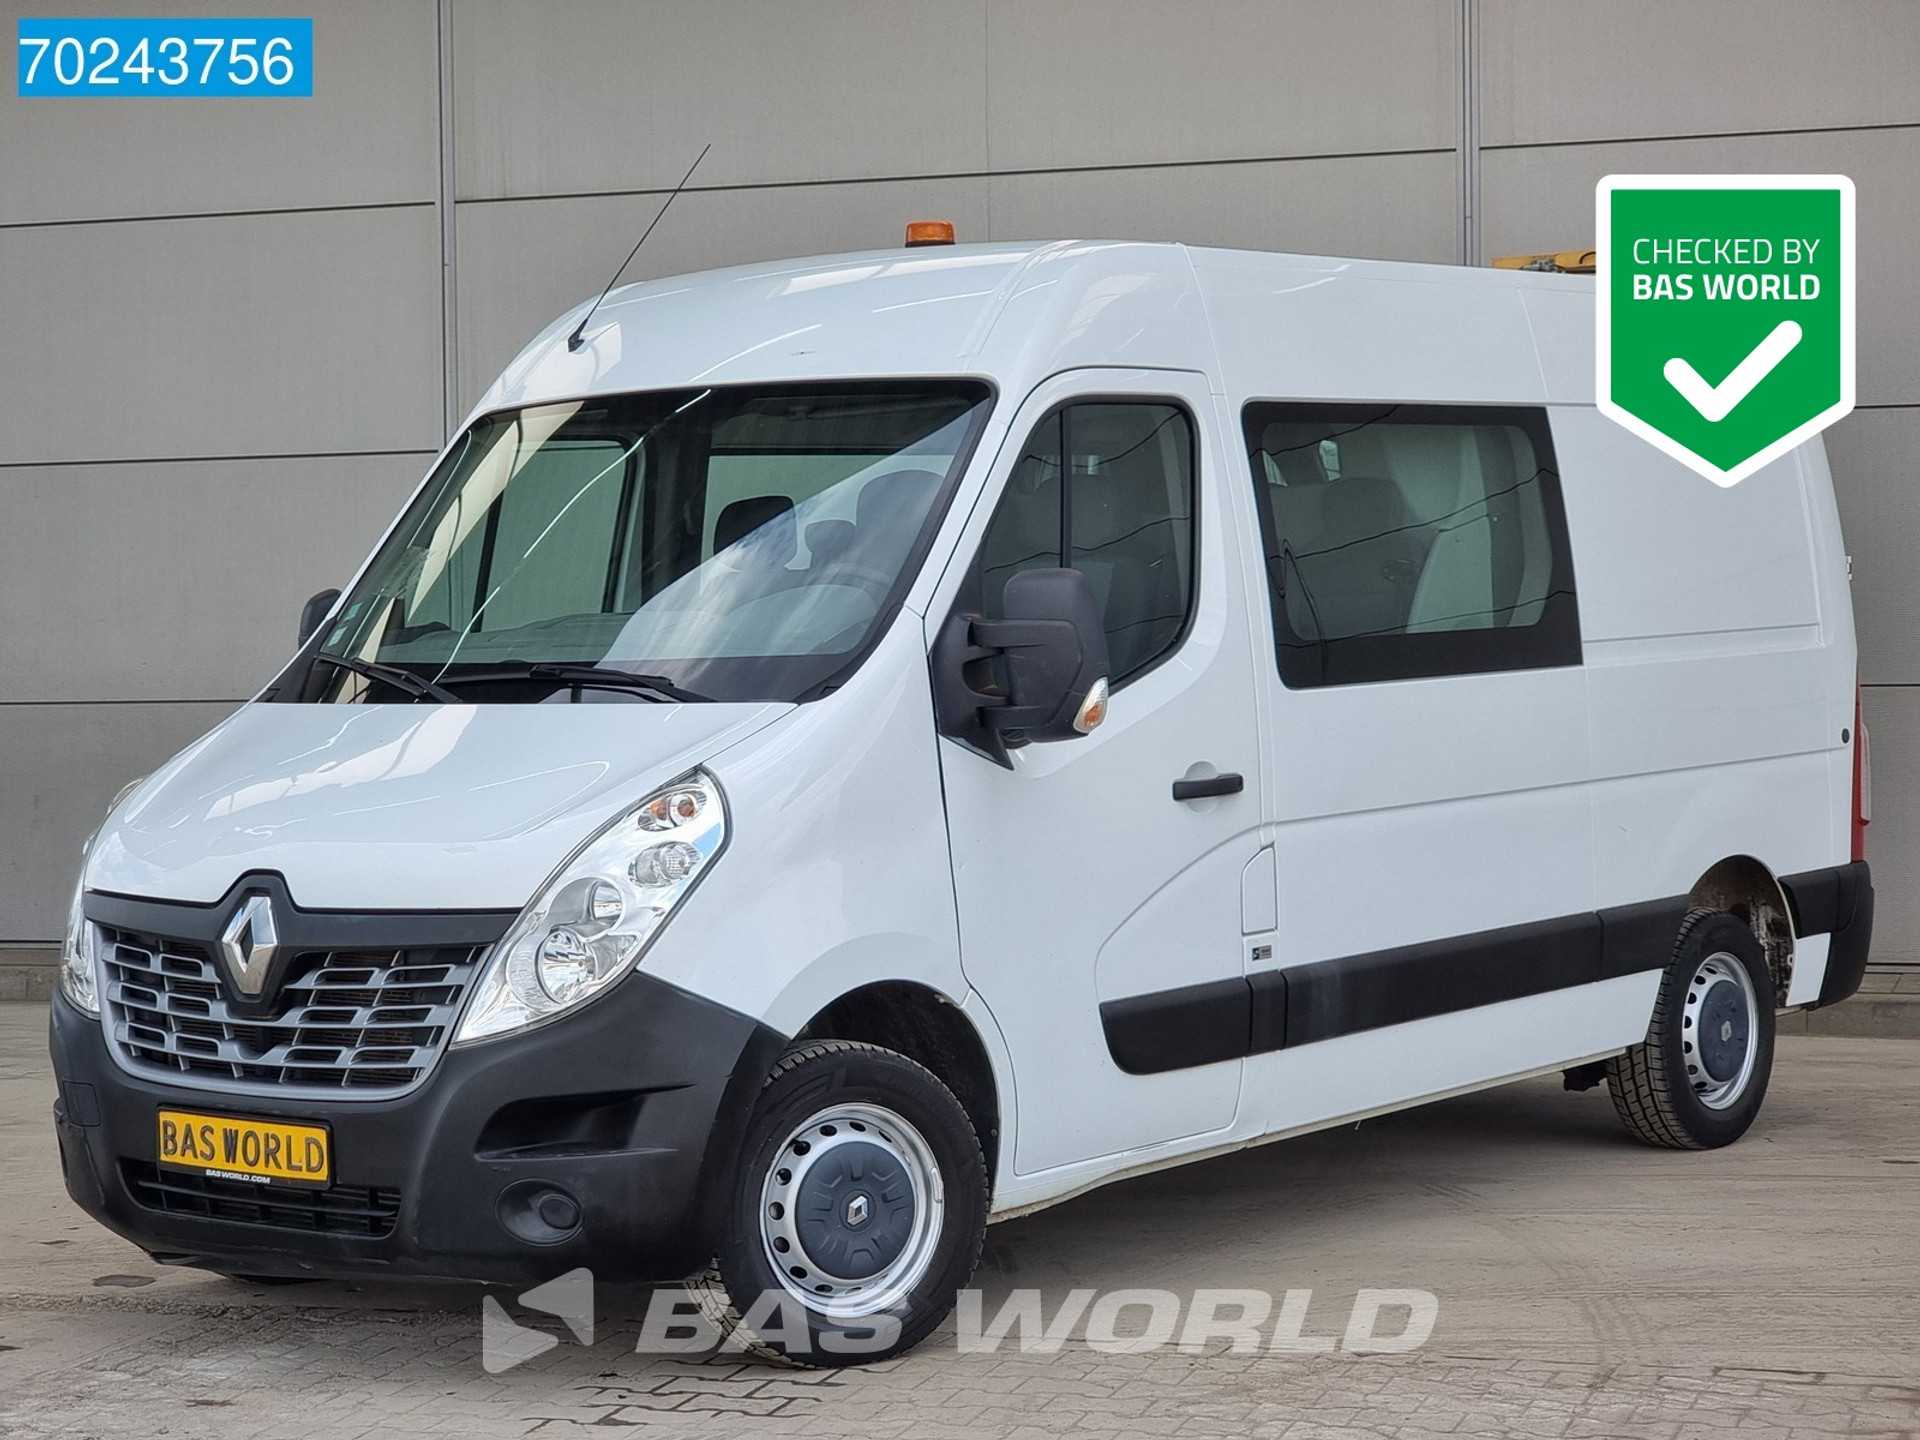 Renault Master 110PK L2H2 7 persoons Dubbel Cabine Trekhaak Airco Cruise Euro6 6m3 Airco Dubbel cabine Trekhaak Cruise control